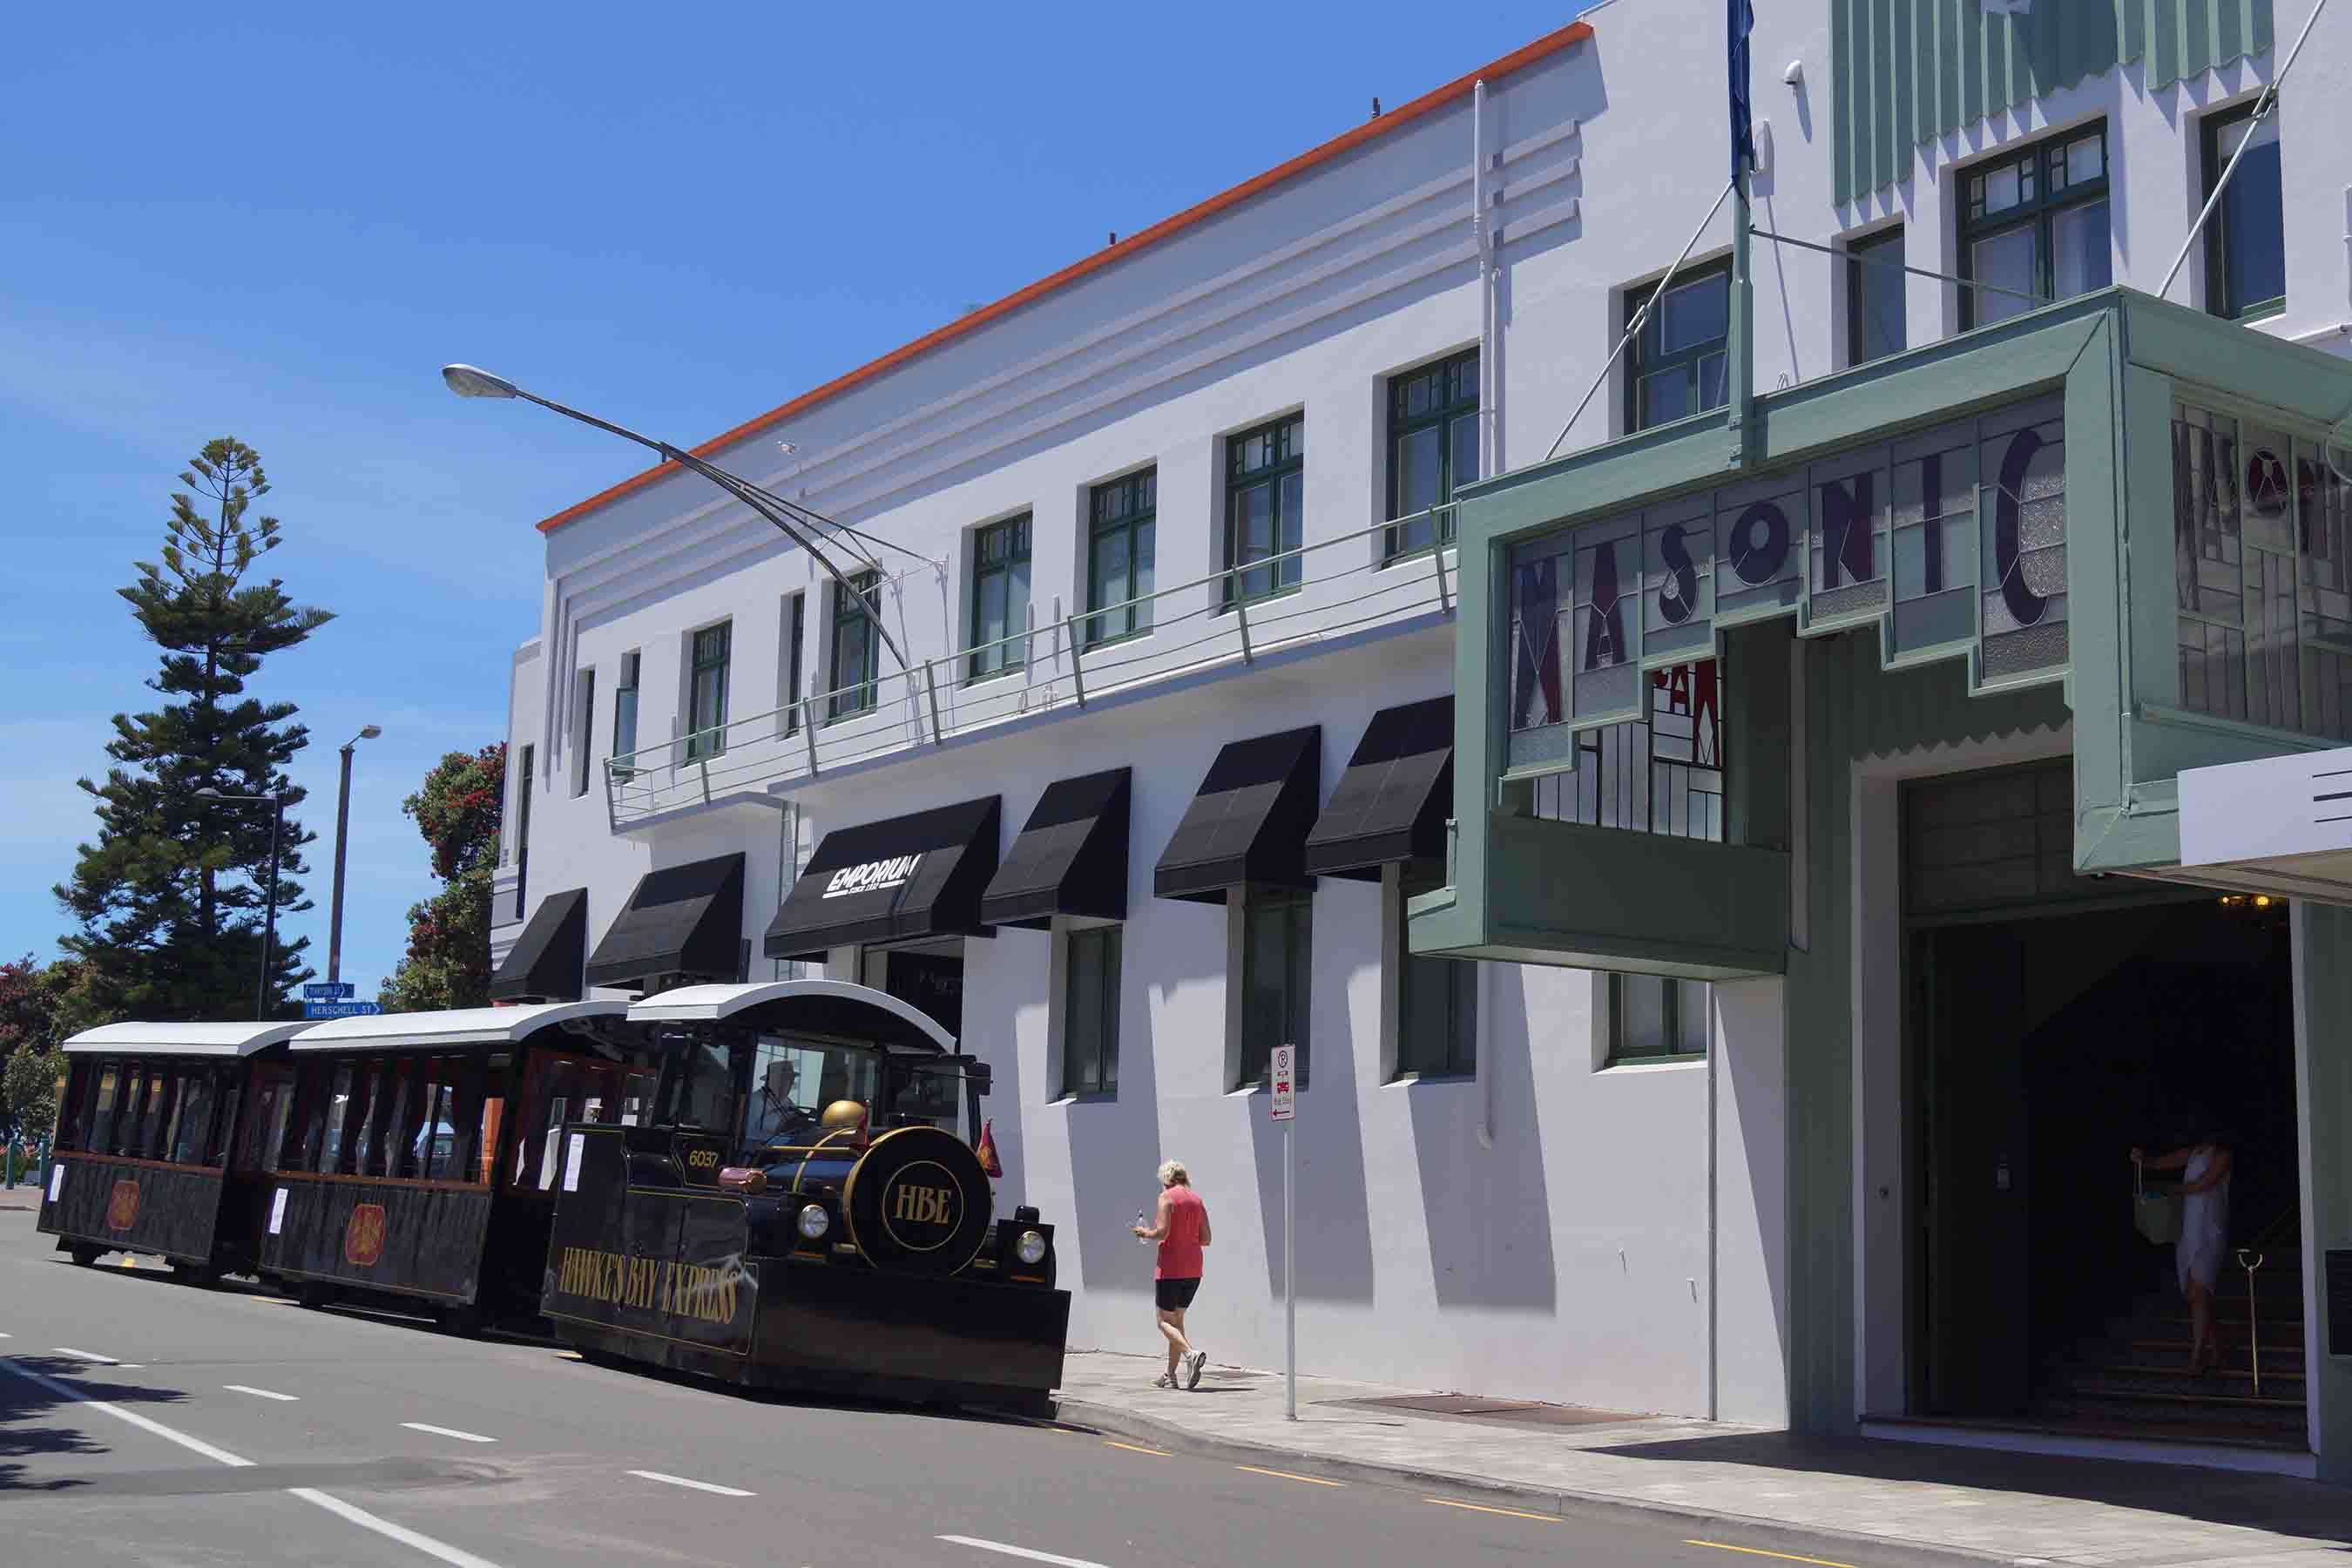 Hawkes Bay Express in front of Masonic Hotel